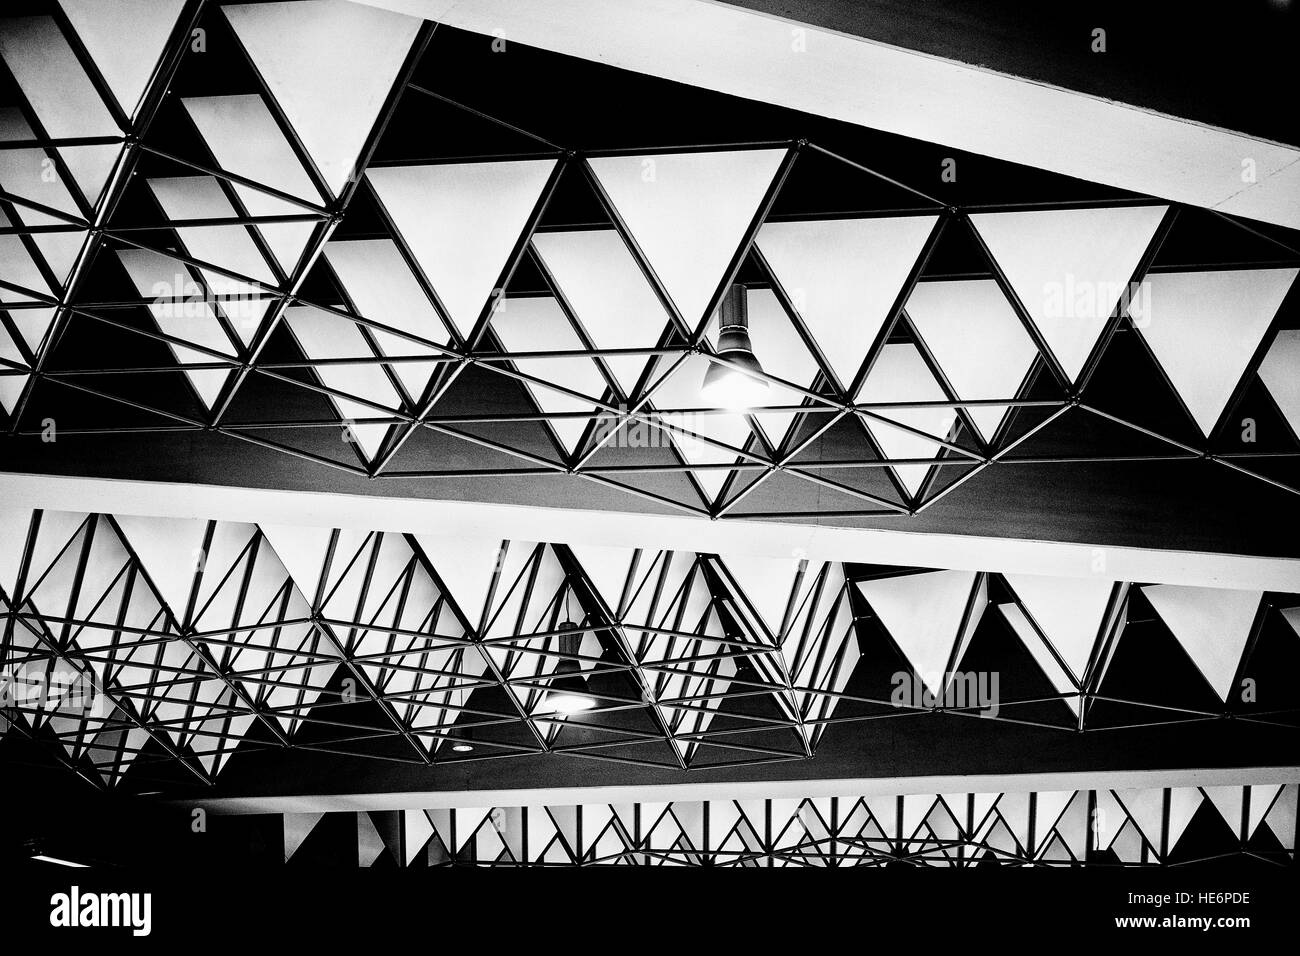 Detail of Architectural Structures in Black and White Stock Photo